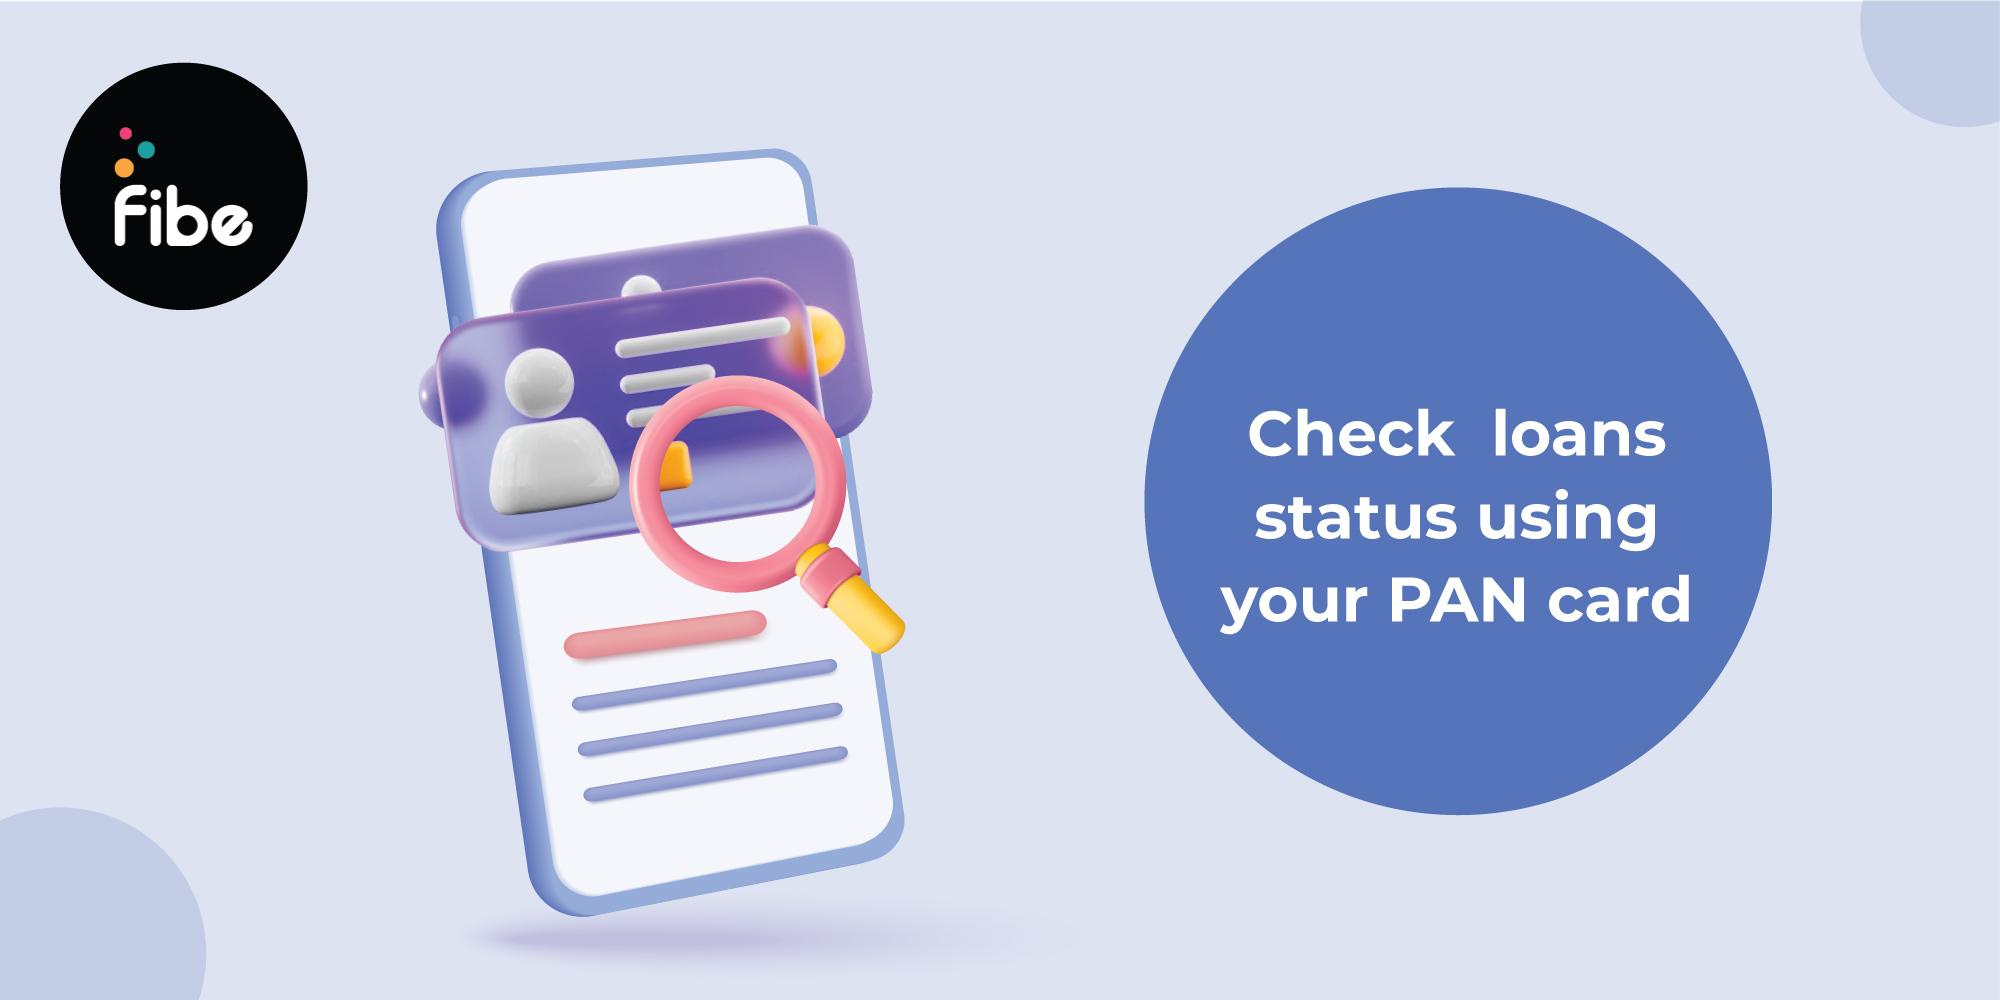 How to Check Your Loan Status Using a PAN Card Online?